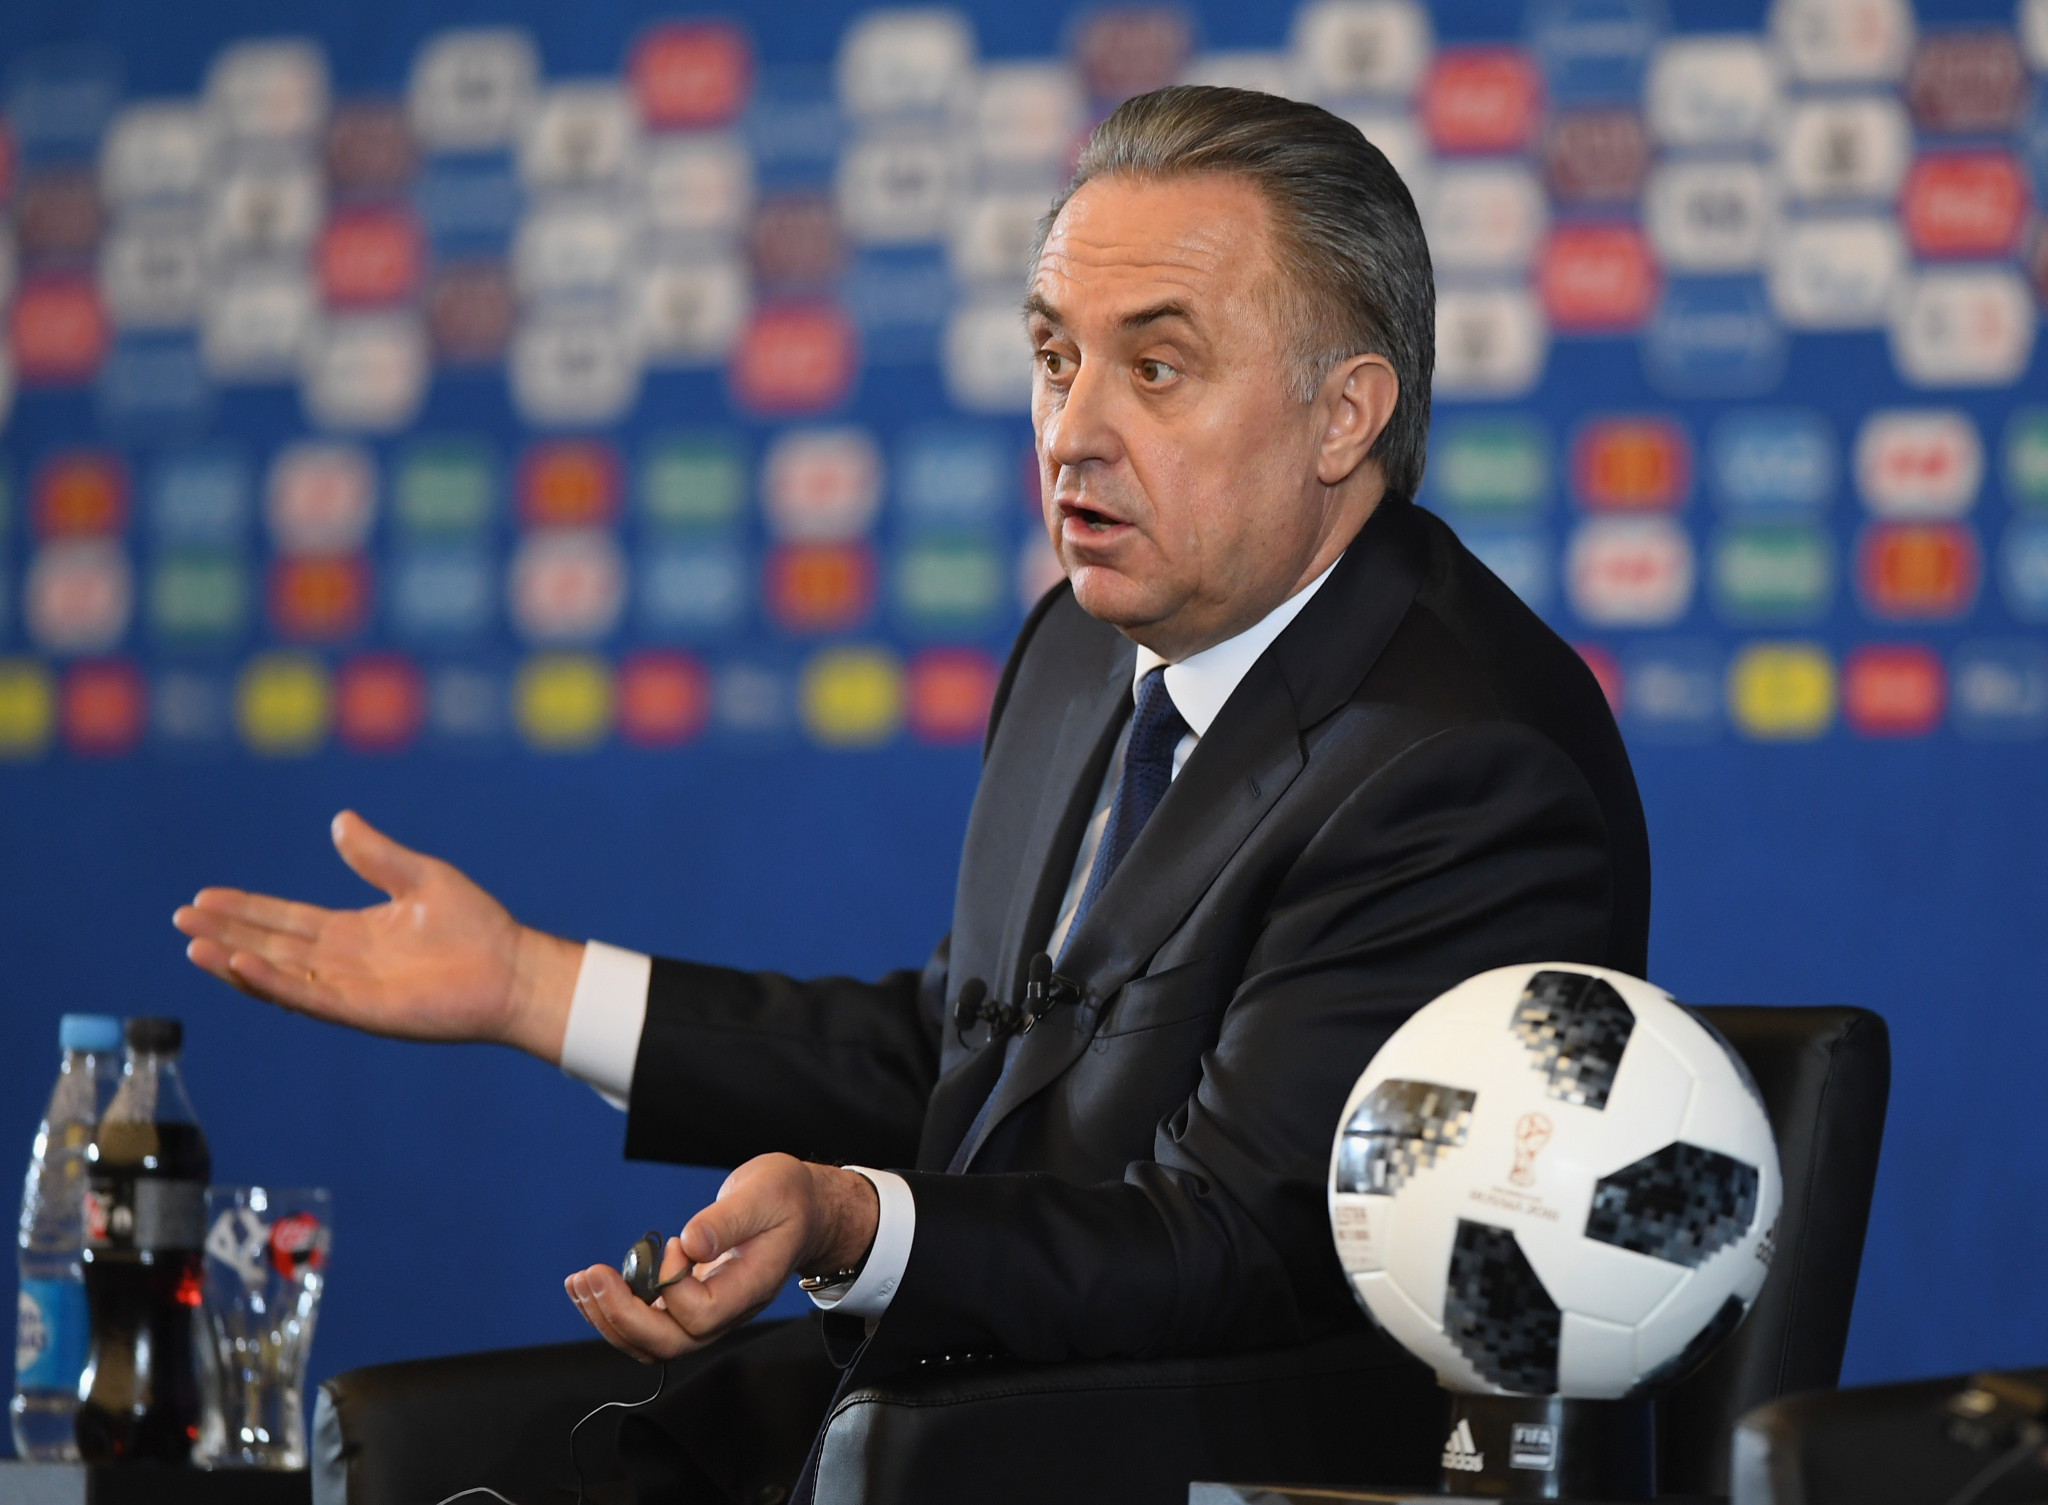 Mutko uses FIFA World Cup press conference to accuse foreign media of "distorting reality" about doping crisis